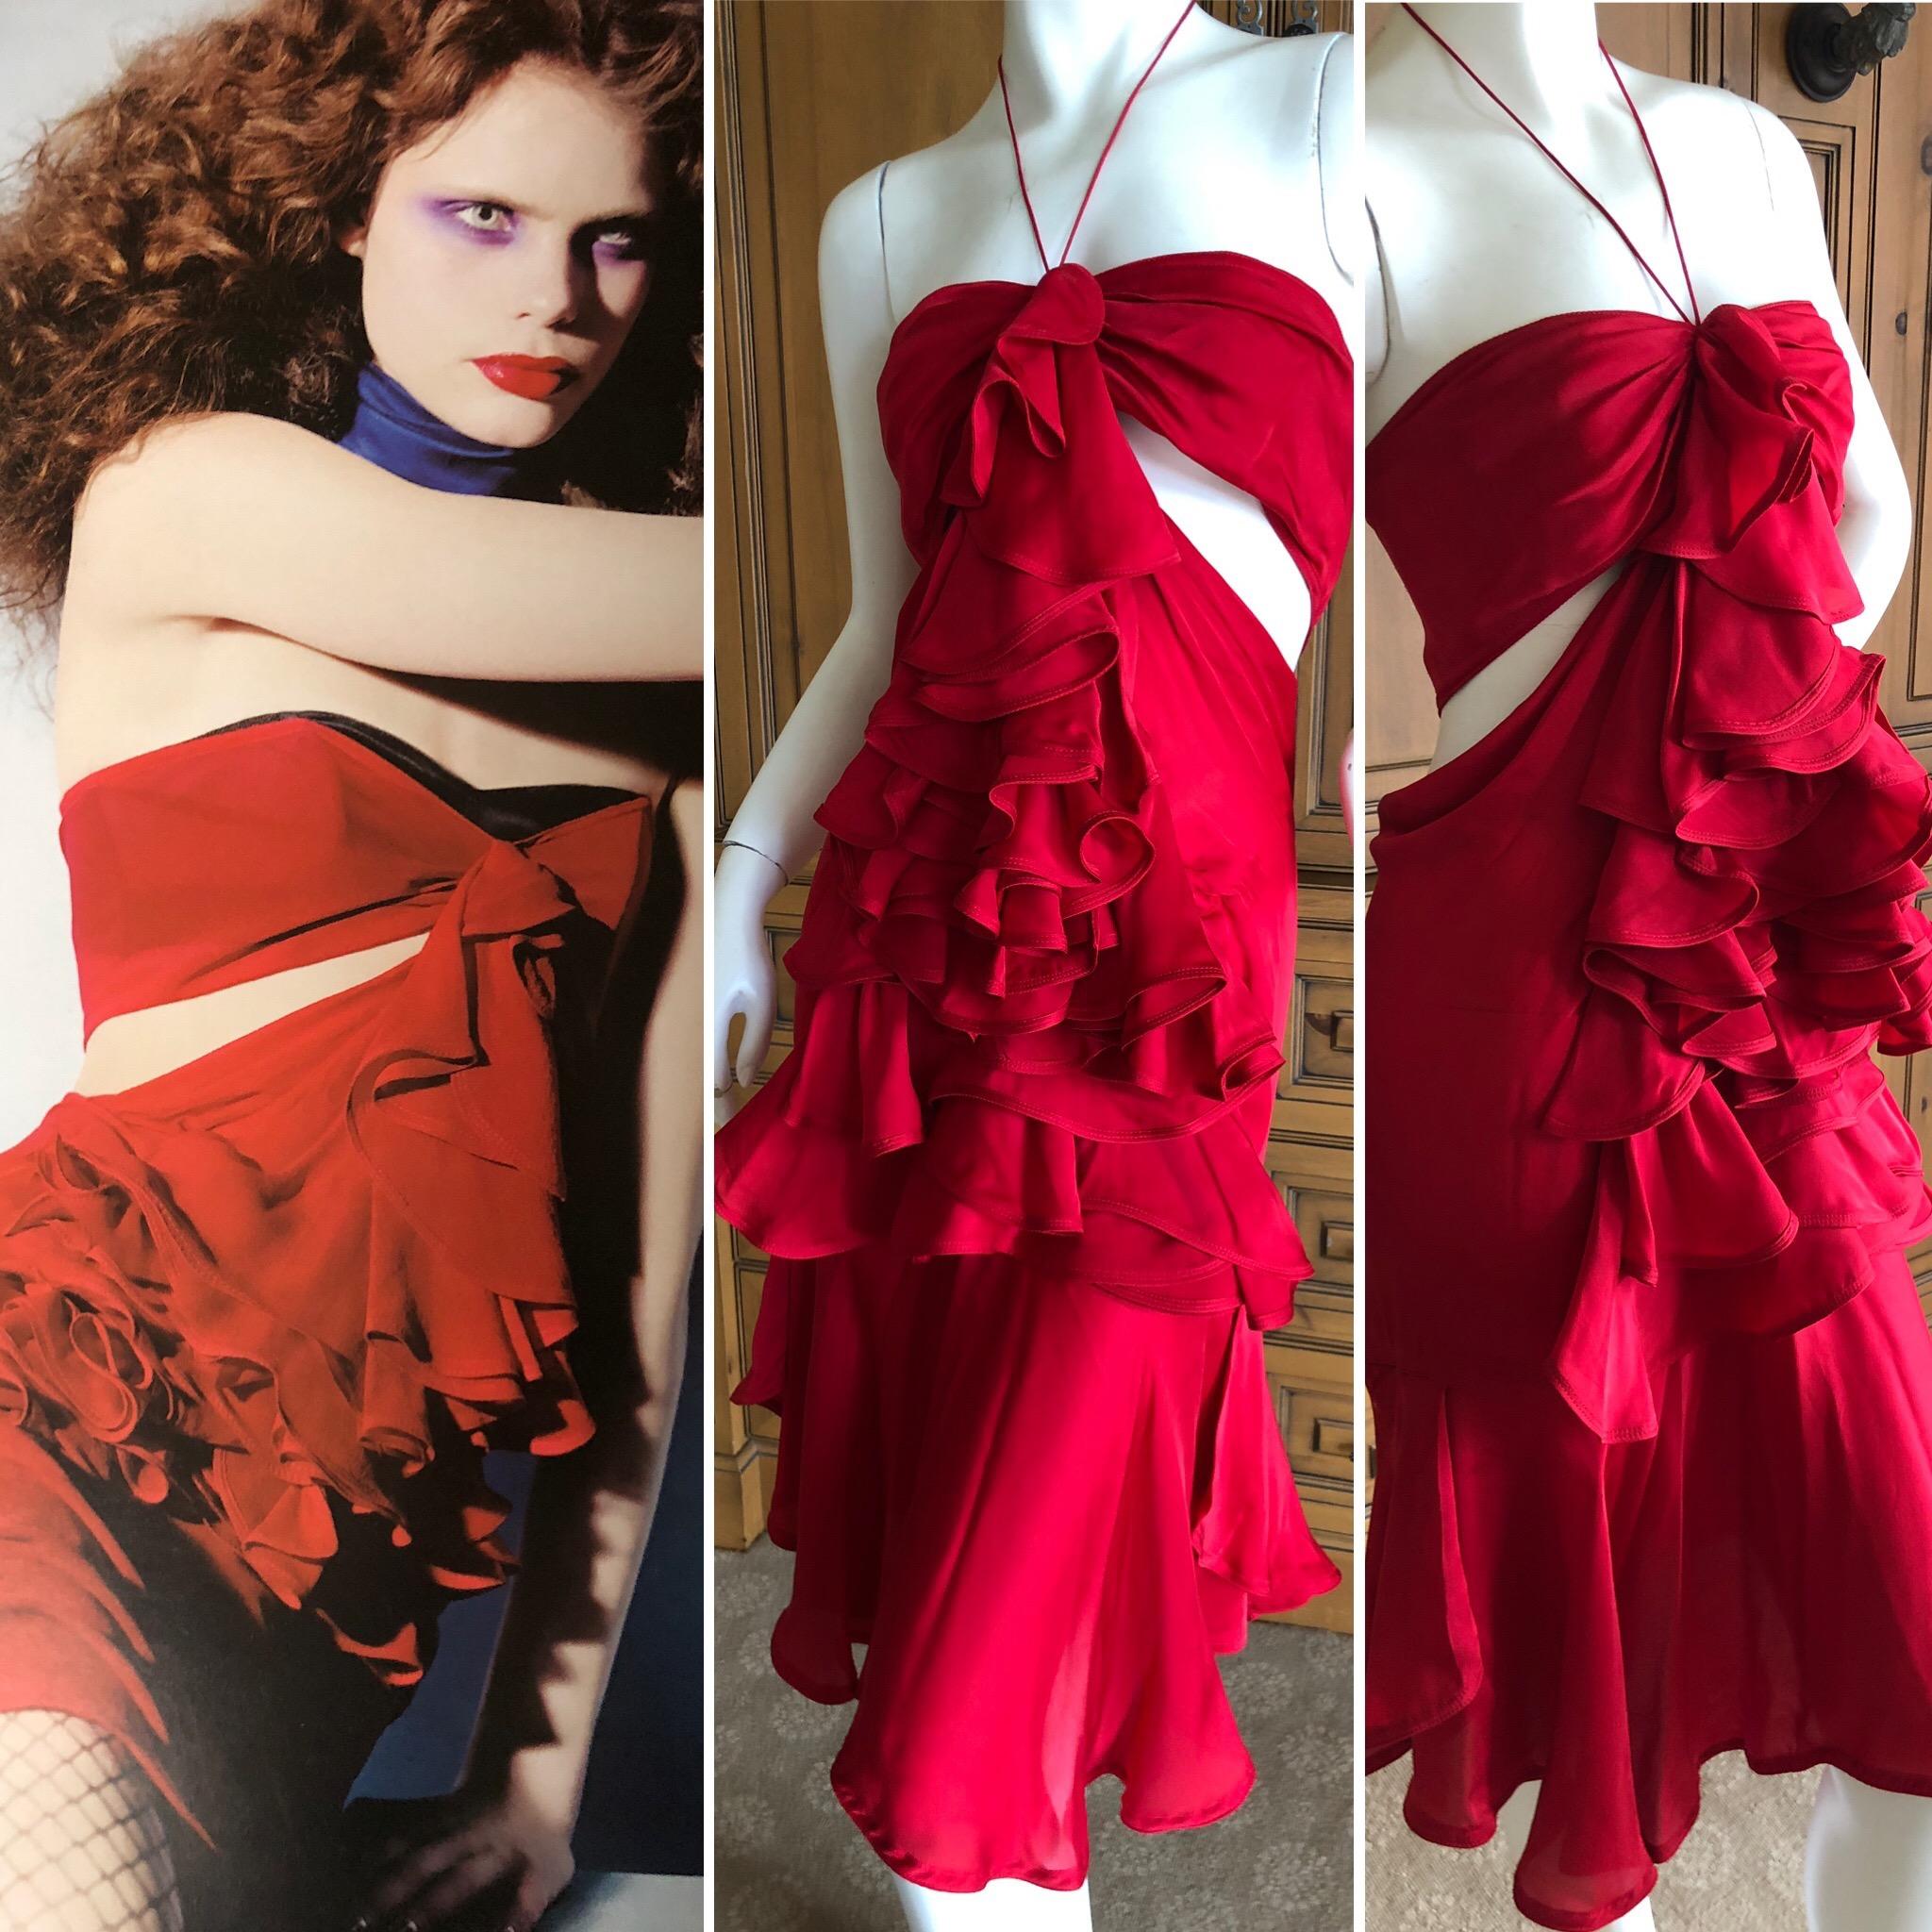 Yves Saint Laurent by Tom Ford 2003 Ruffled Red Silk Dress
French Size 40
Bust 35